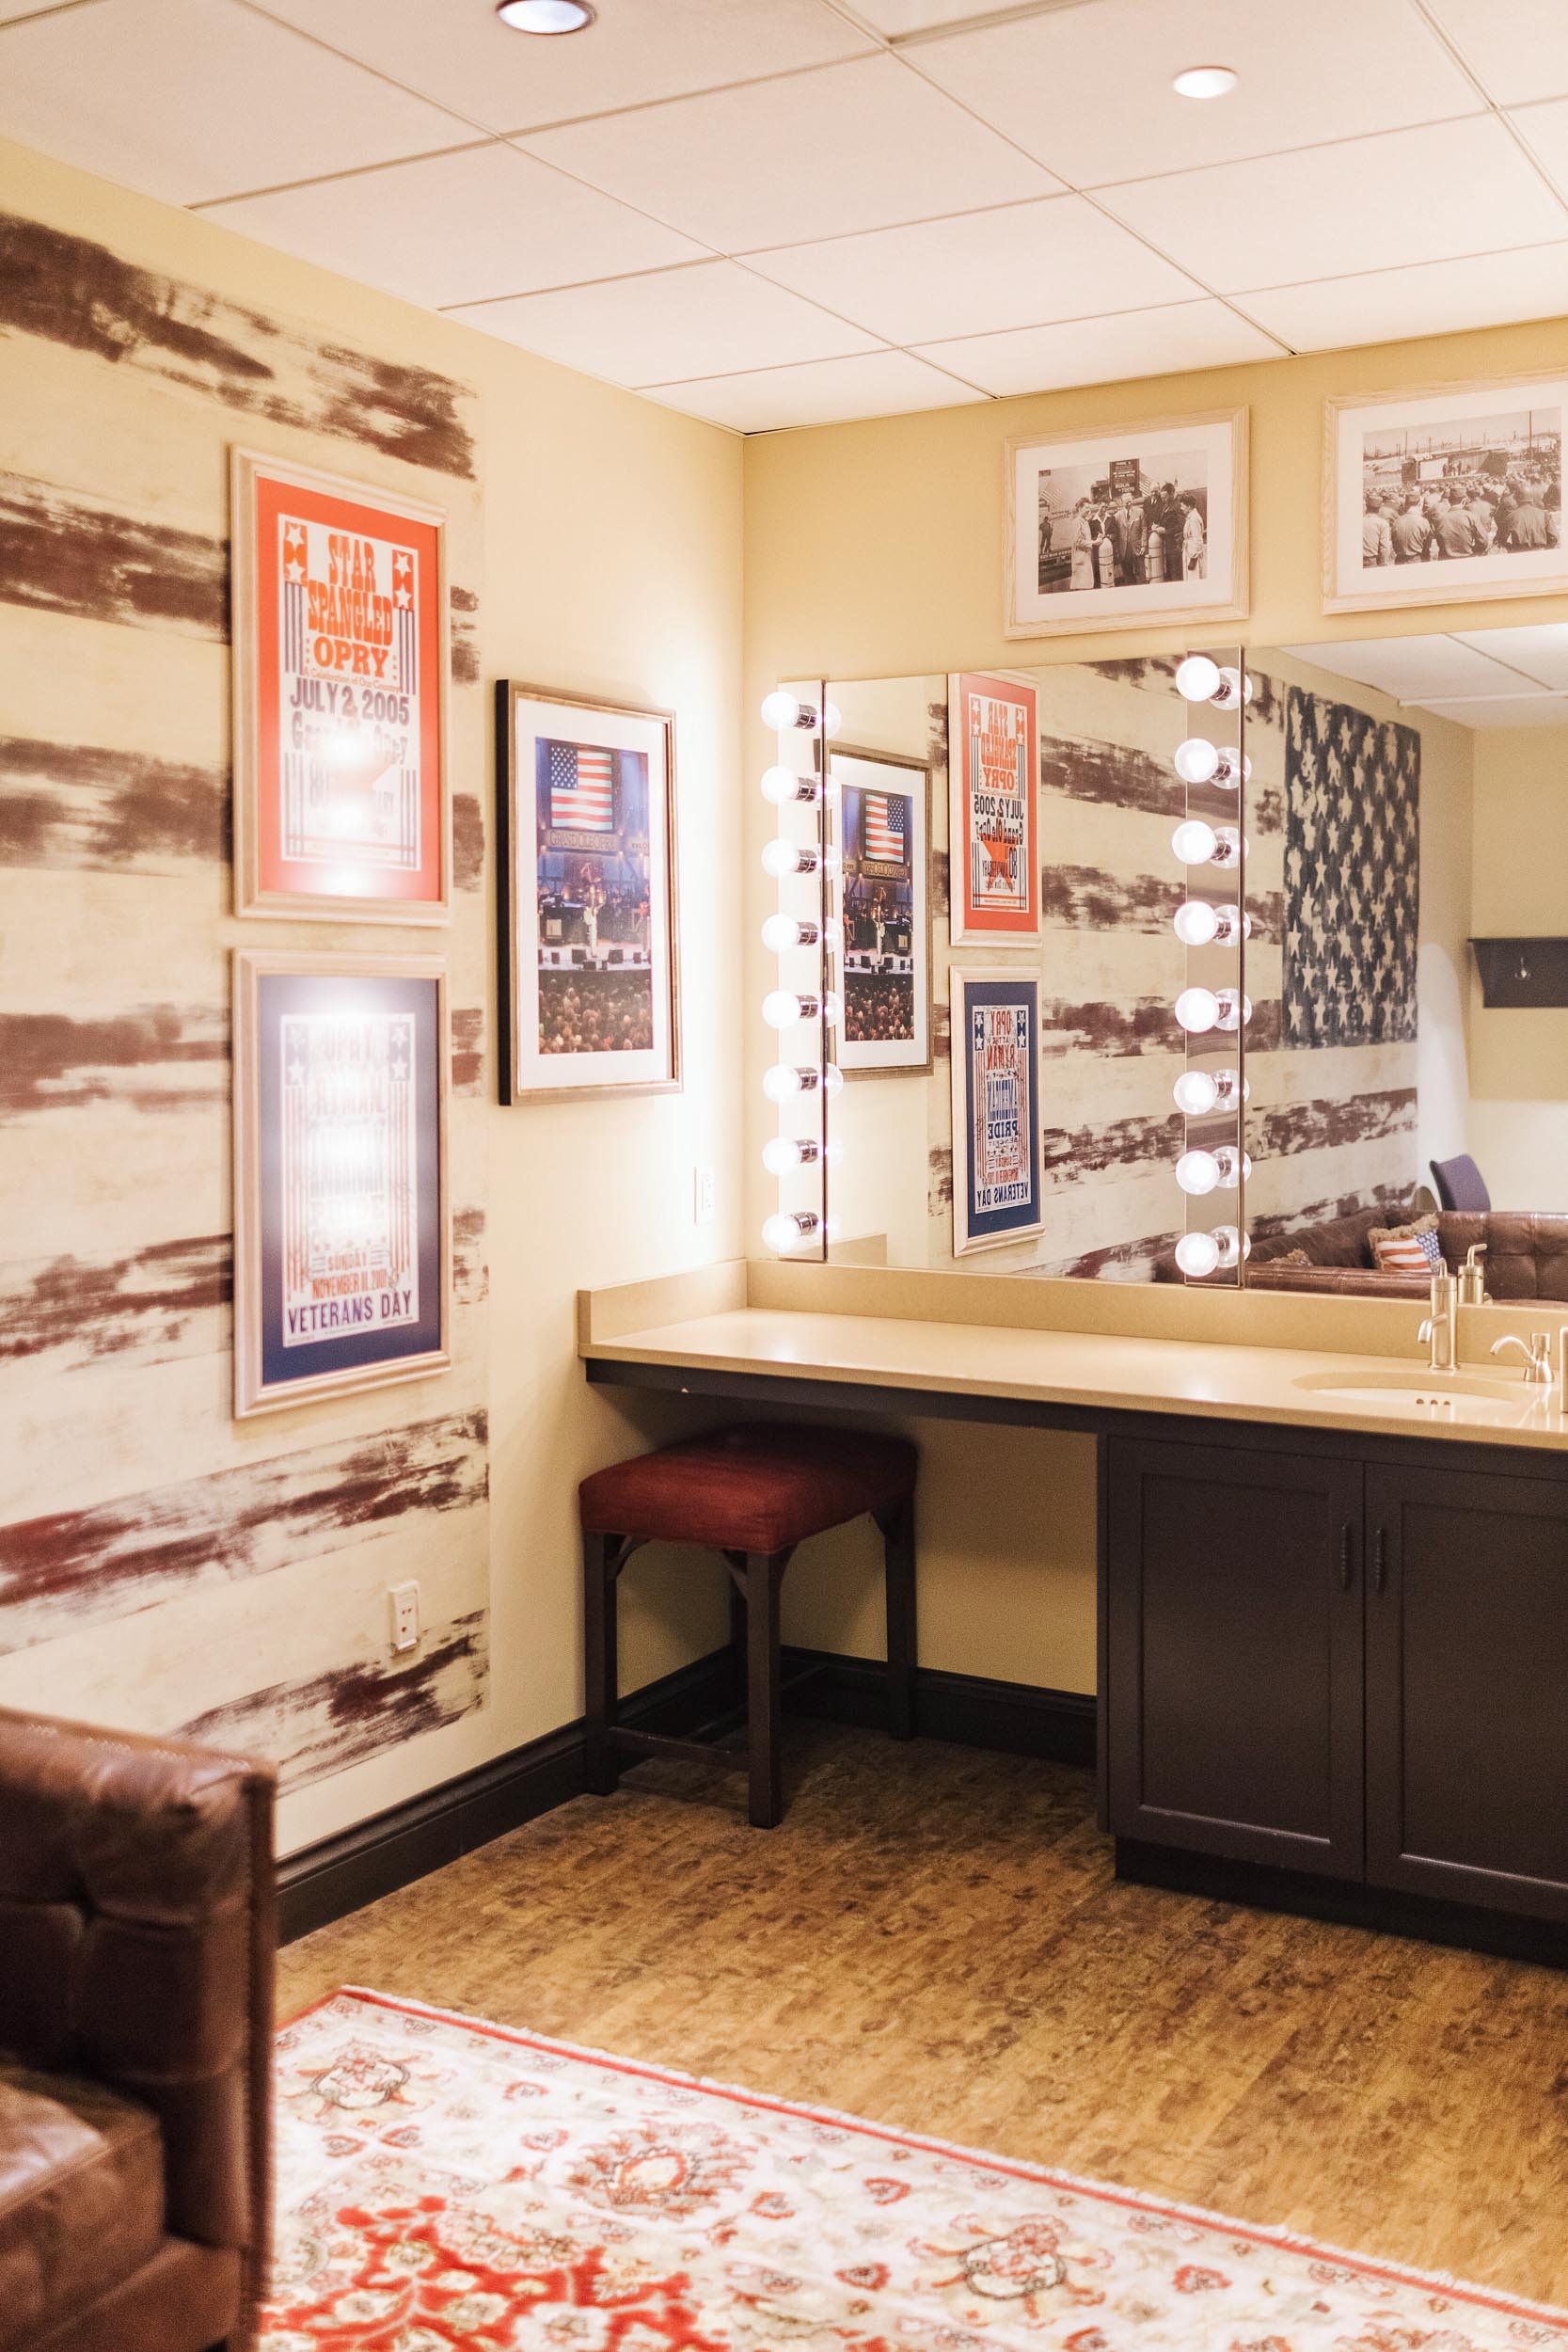 The stars and stripes themed dressing room backstage at the Opry